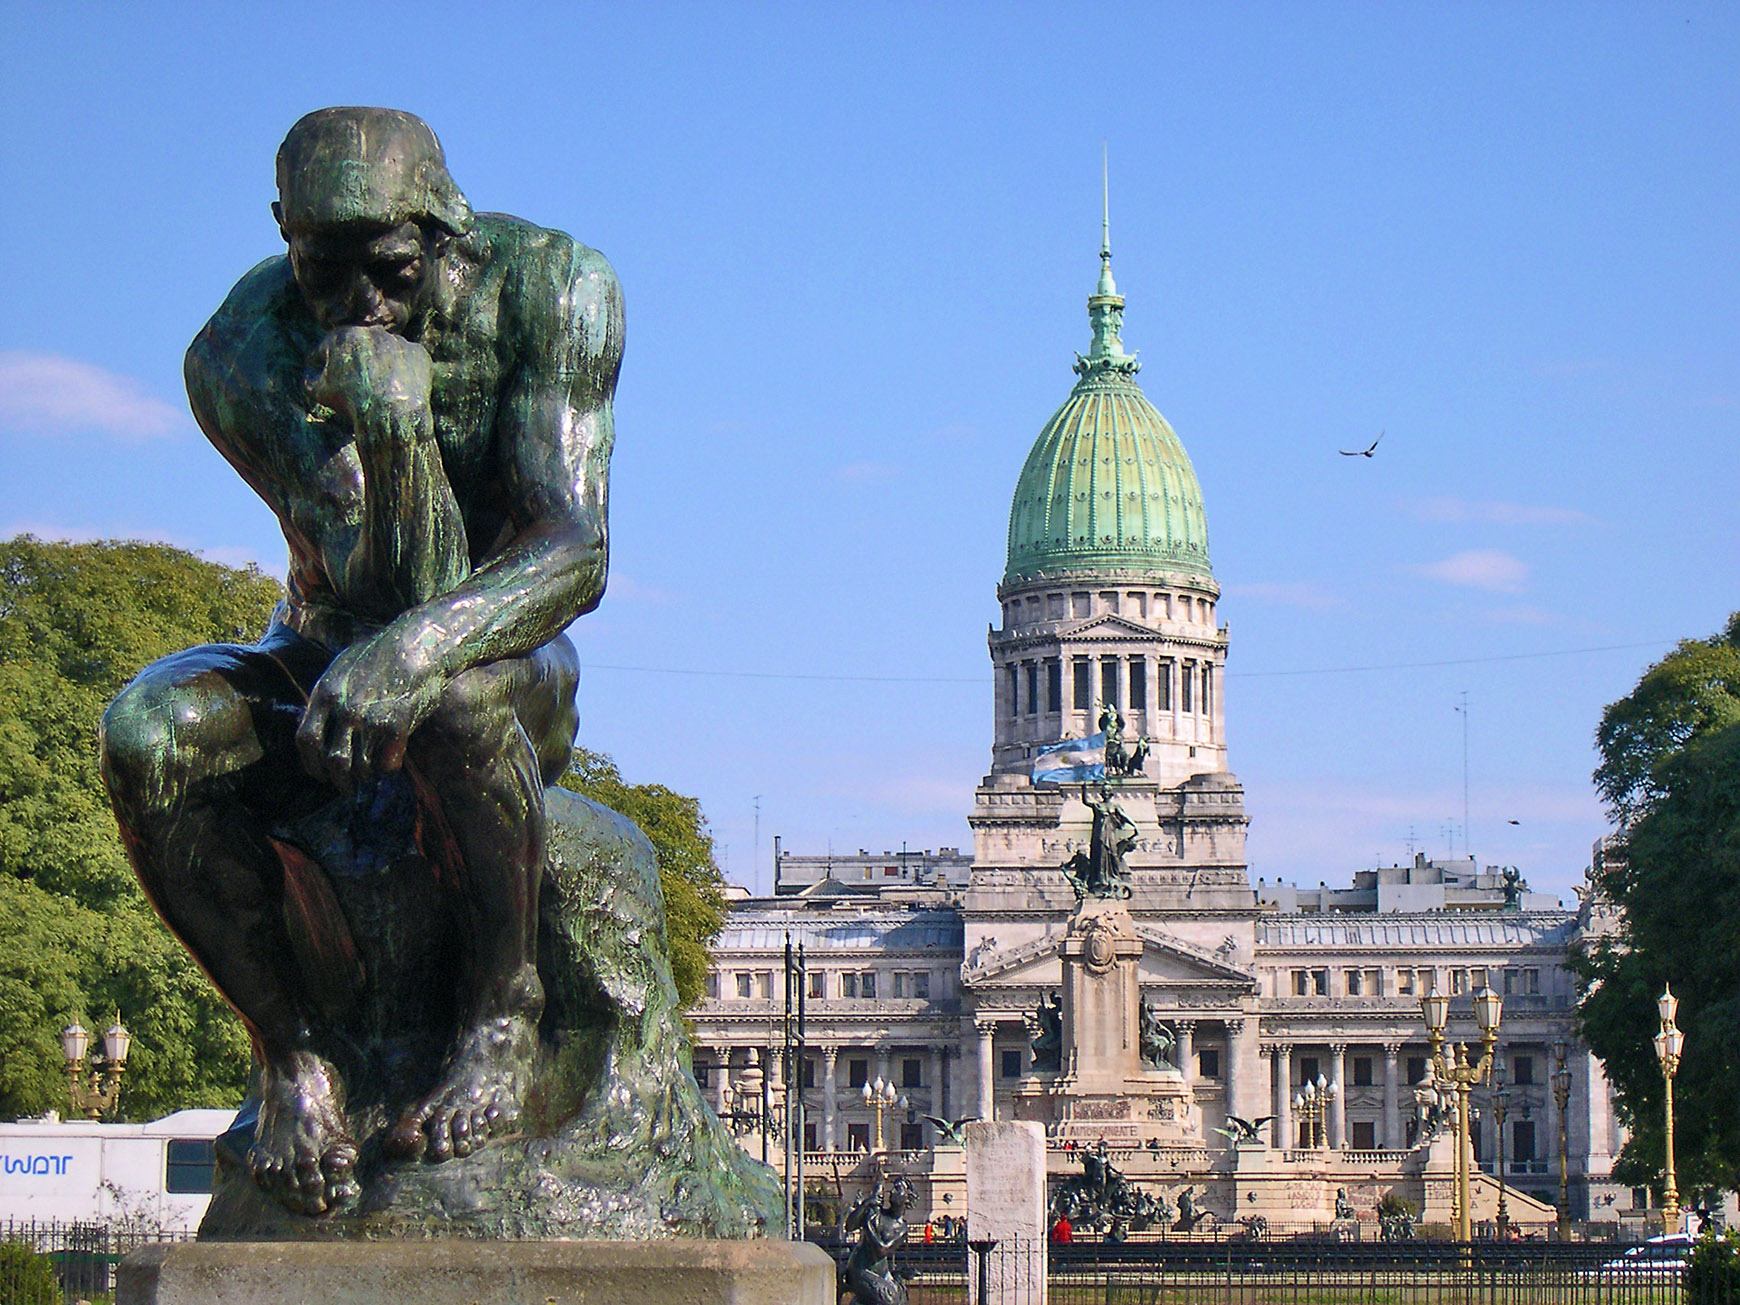 Study abroad in Argentina with IFSA